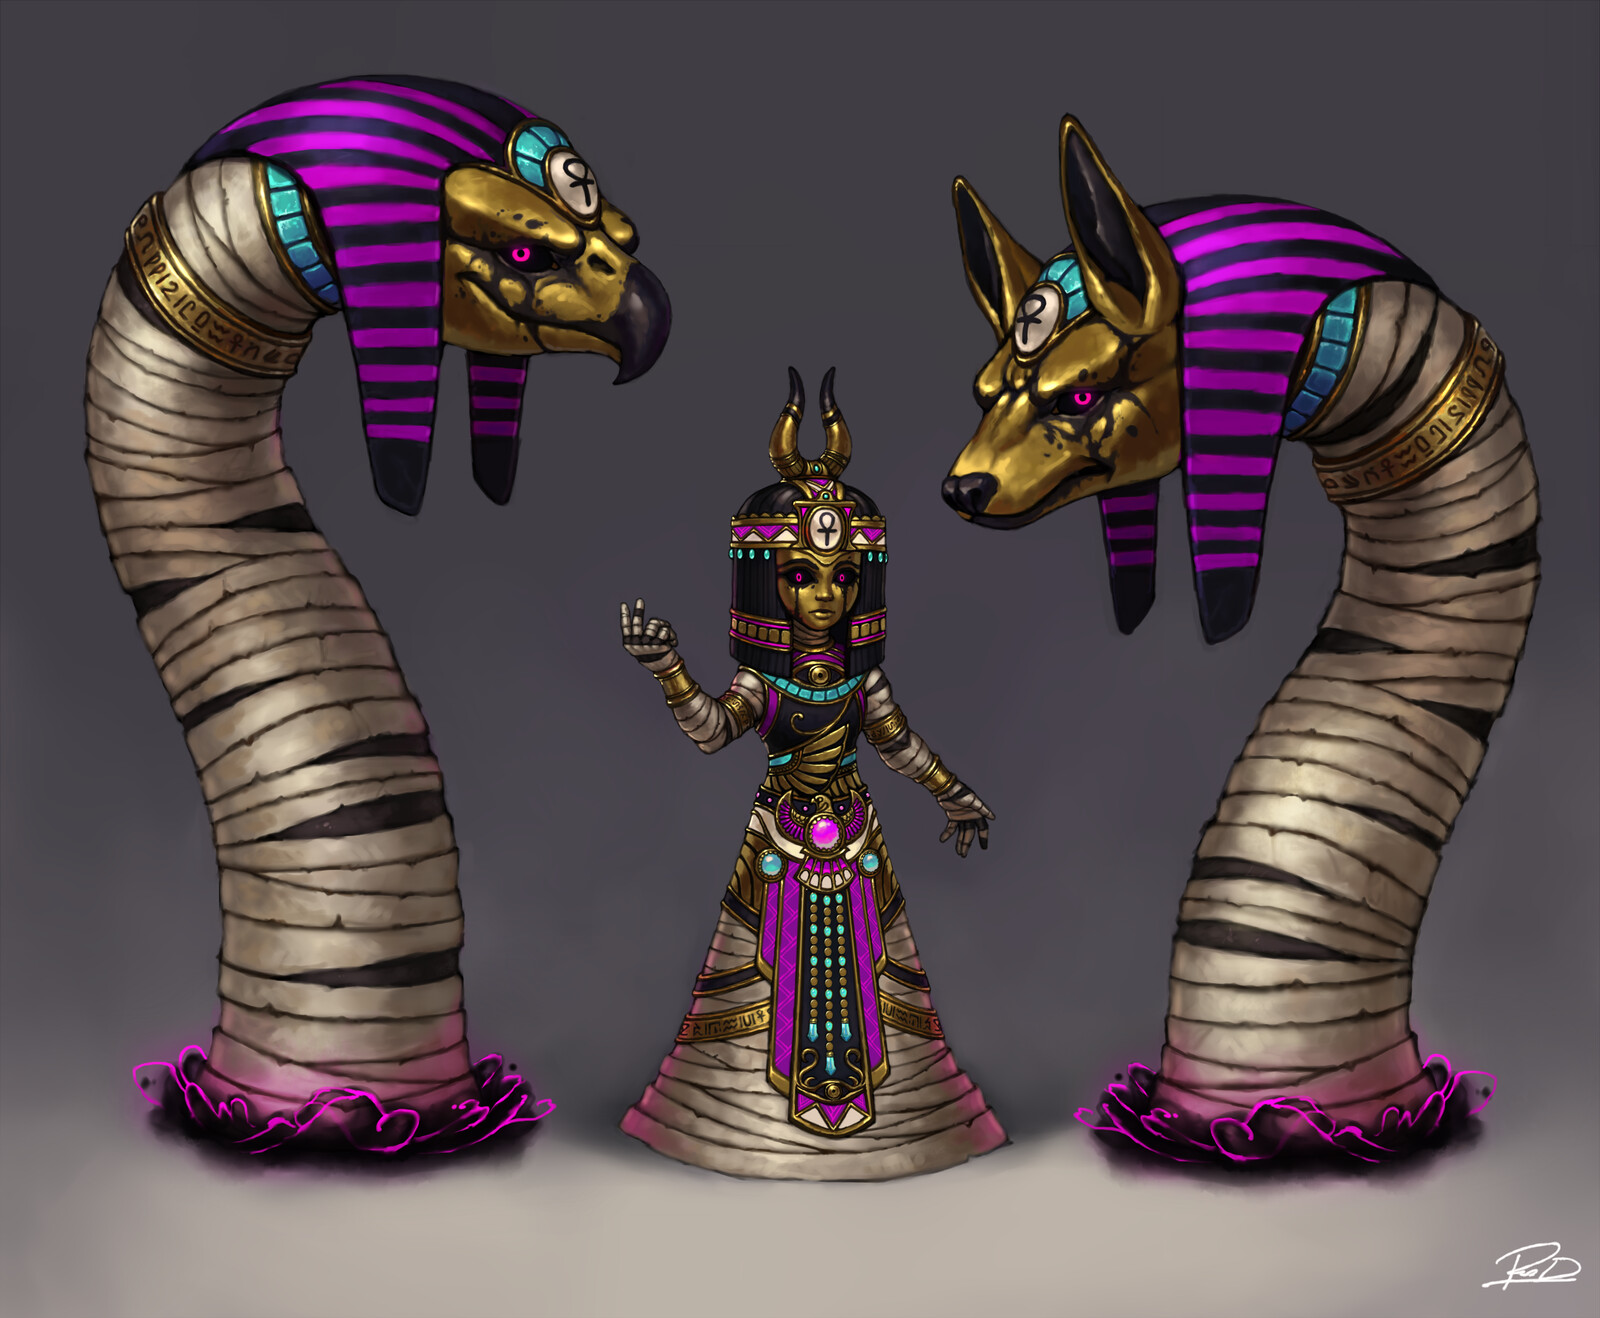 Fan Skin Concept for Scylla, a character from Smite. 